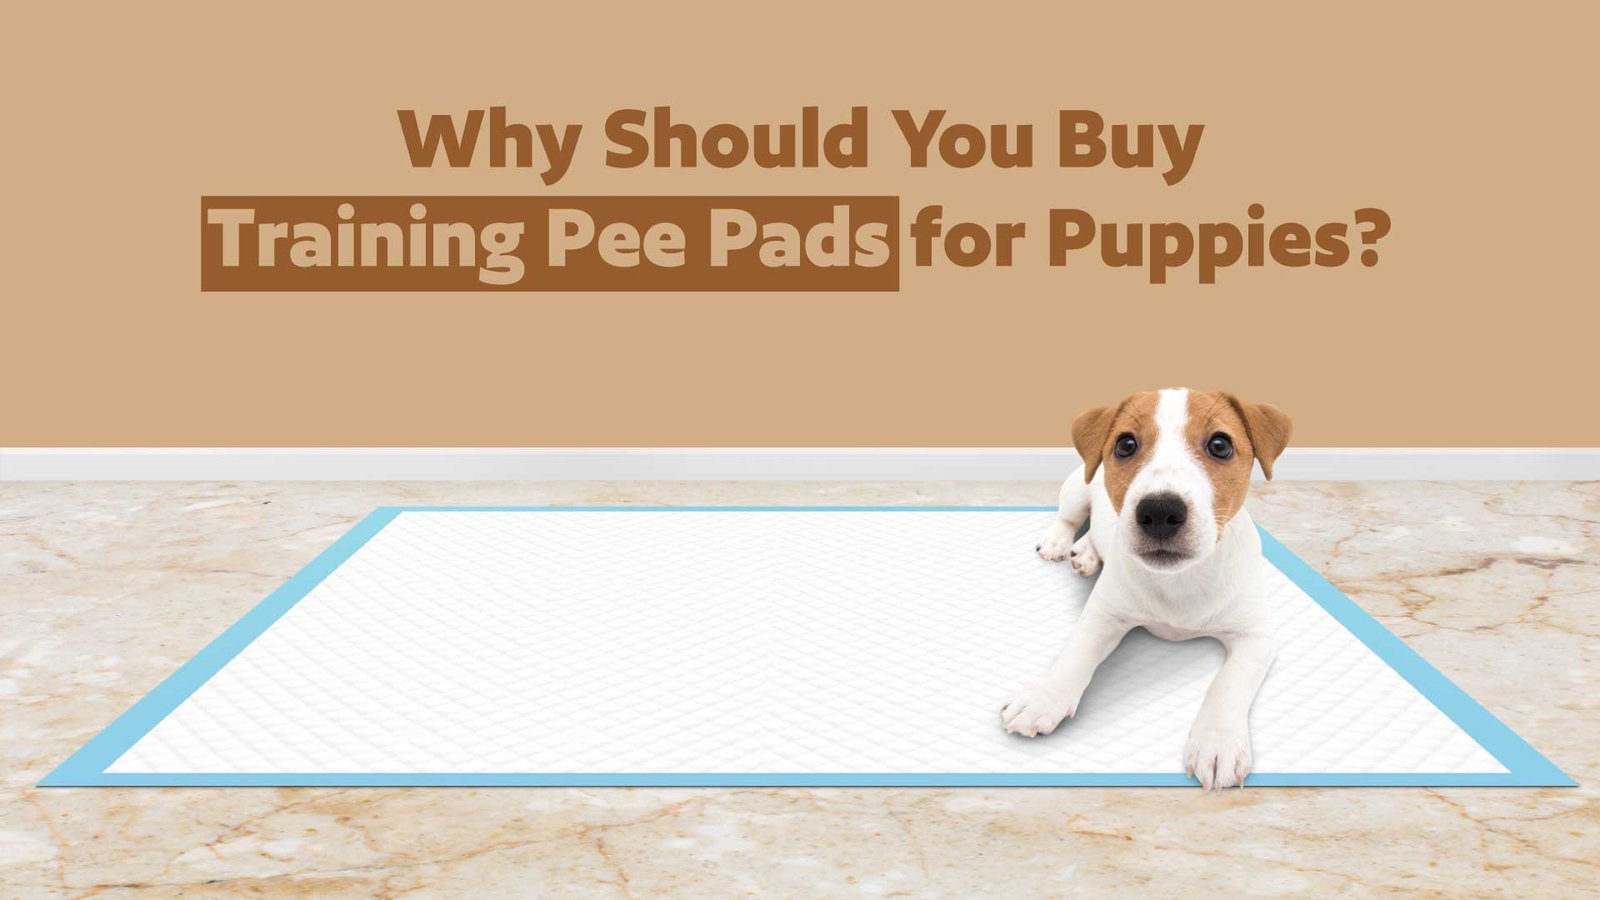 Why Should You Buy Training Pee Pads for Puppies?